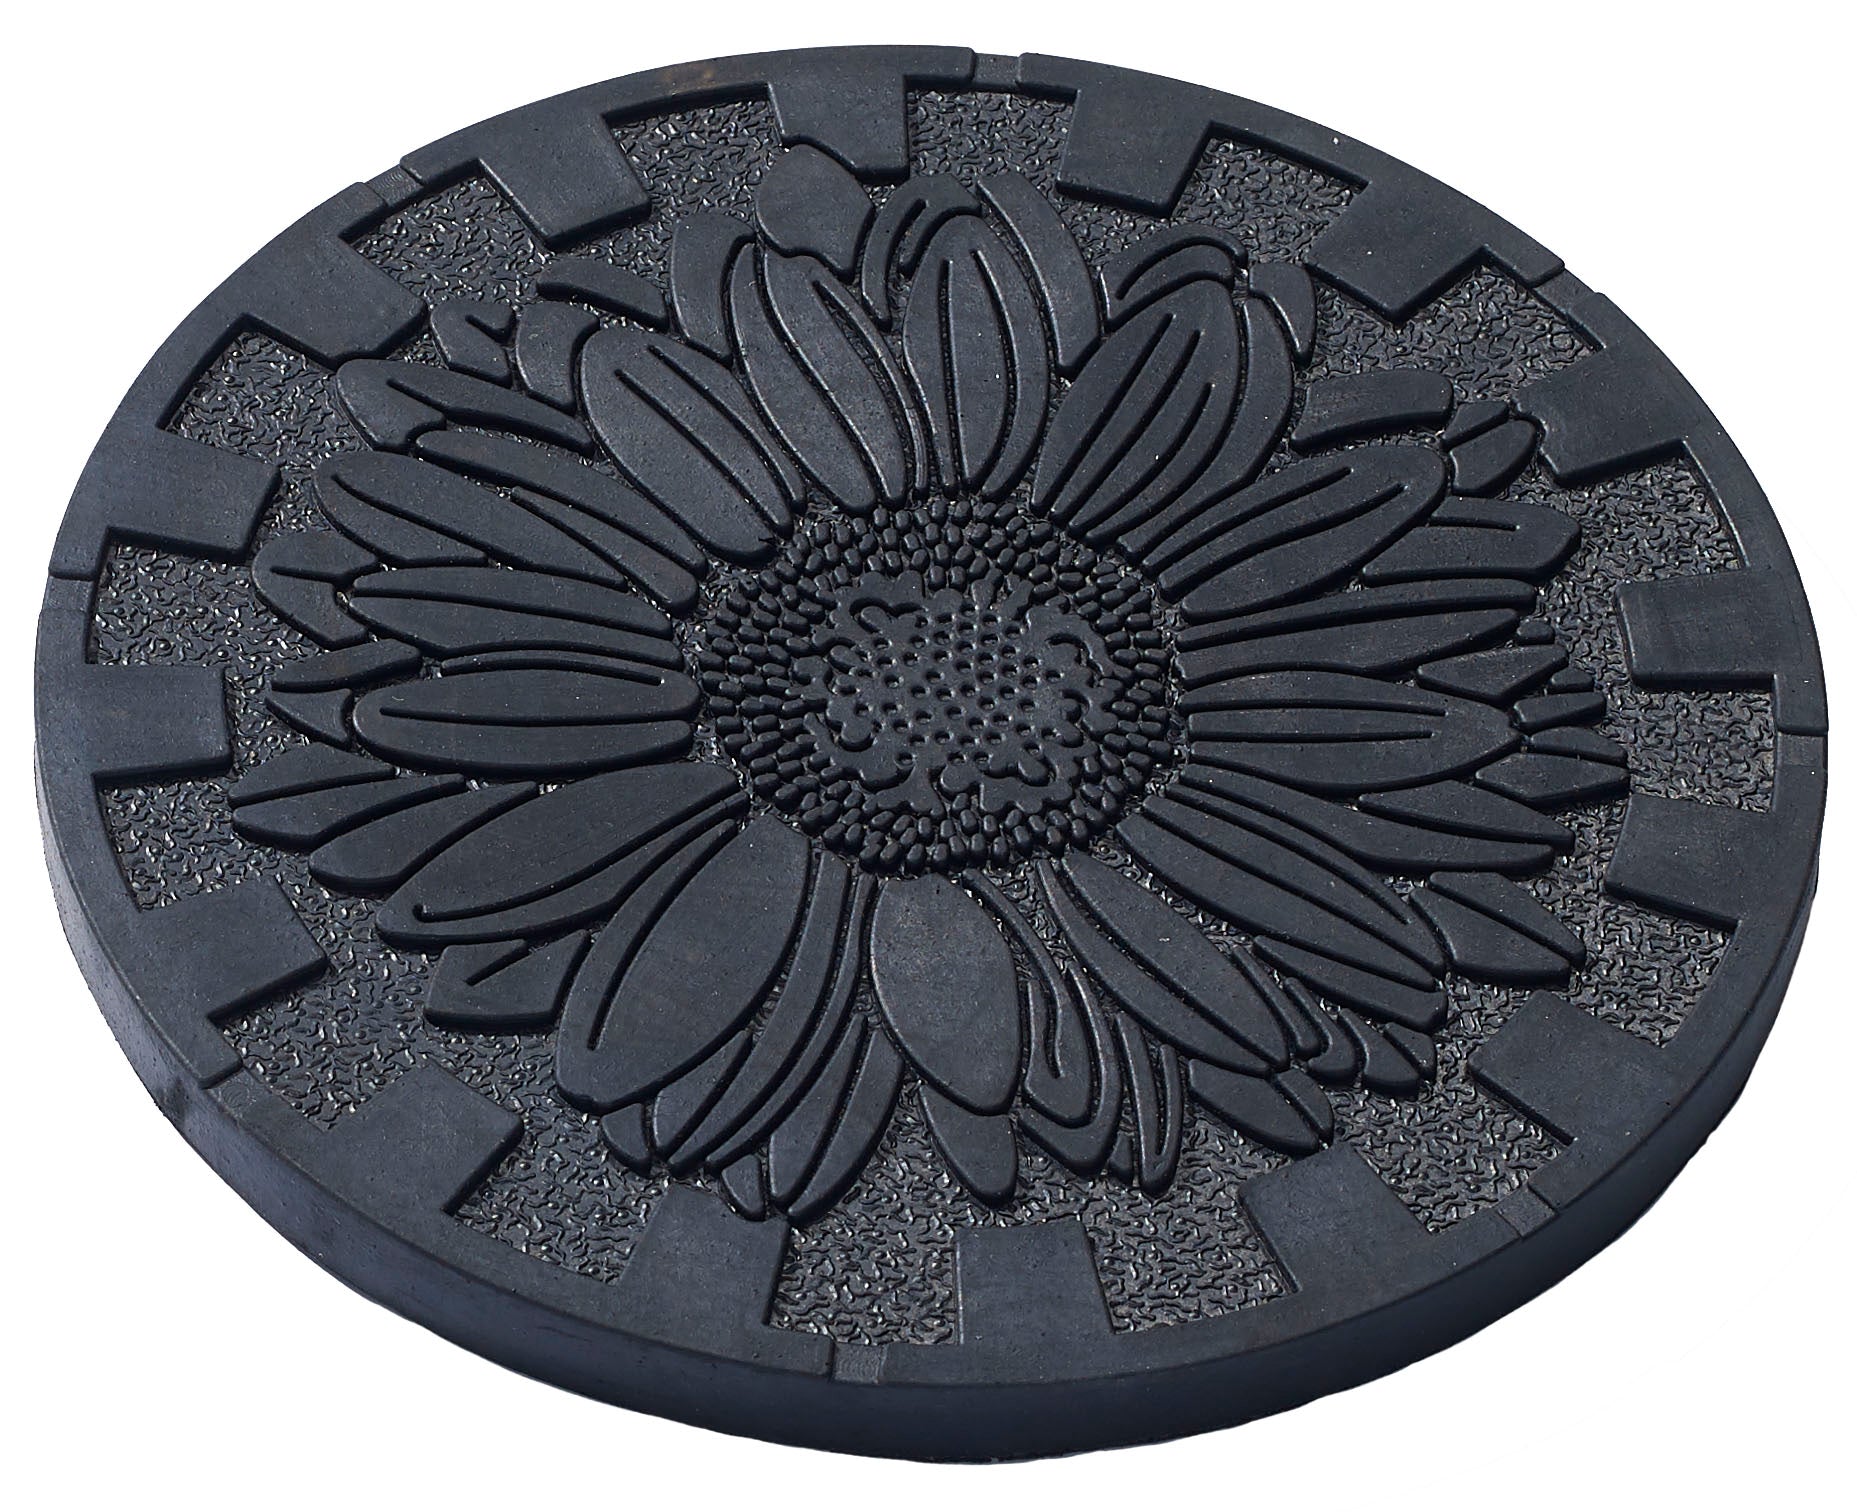 Sunflower Deluxe Stepping Stone (Set of 3)